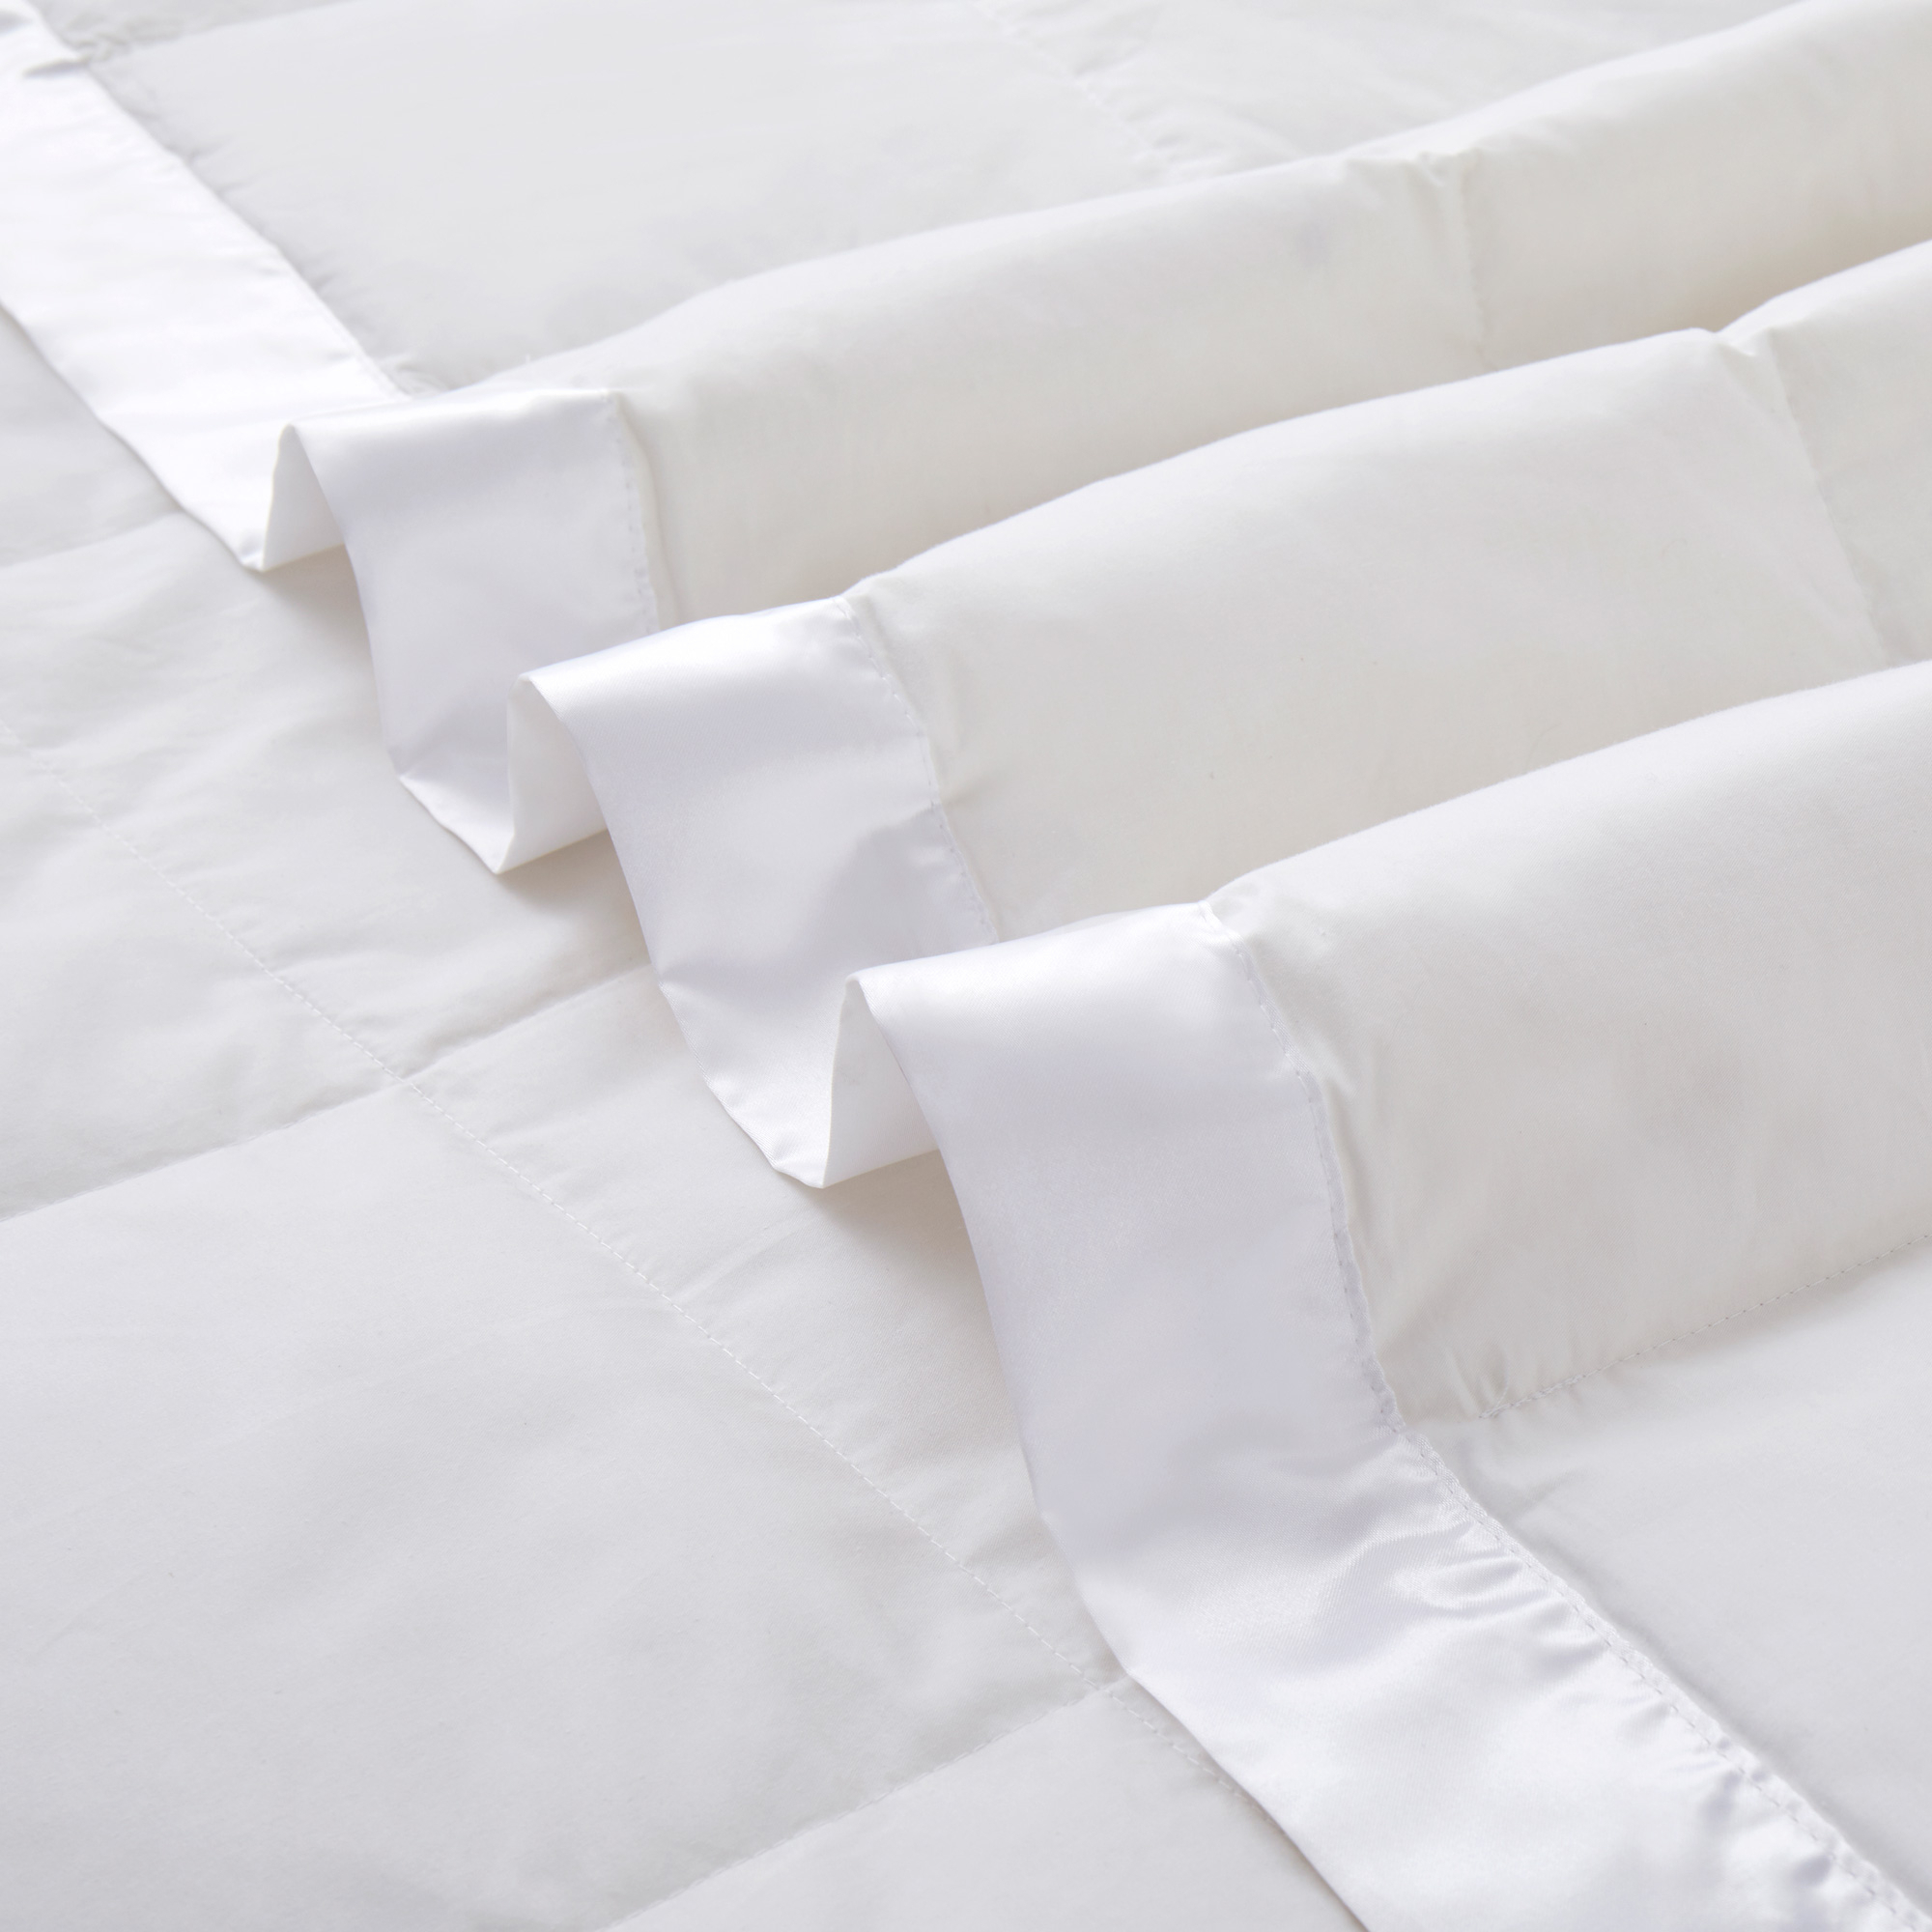 Puredown Light Weight Down Blanket, Cotton Cover, Satin Weave - White, King